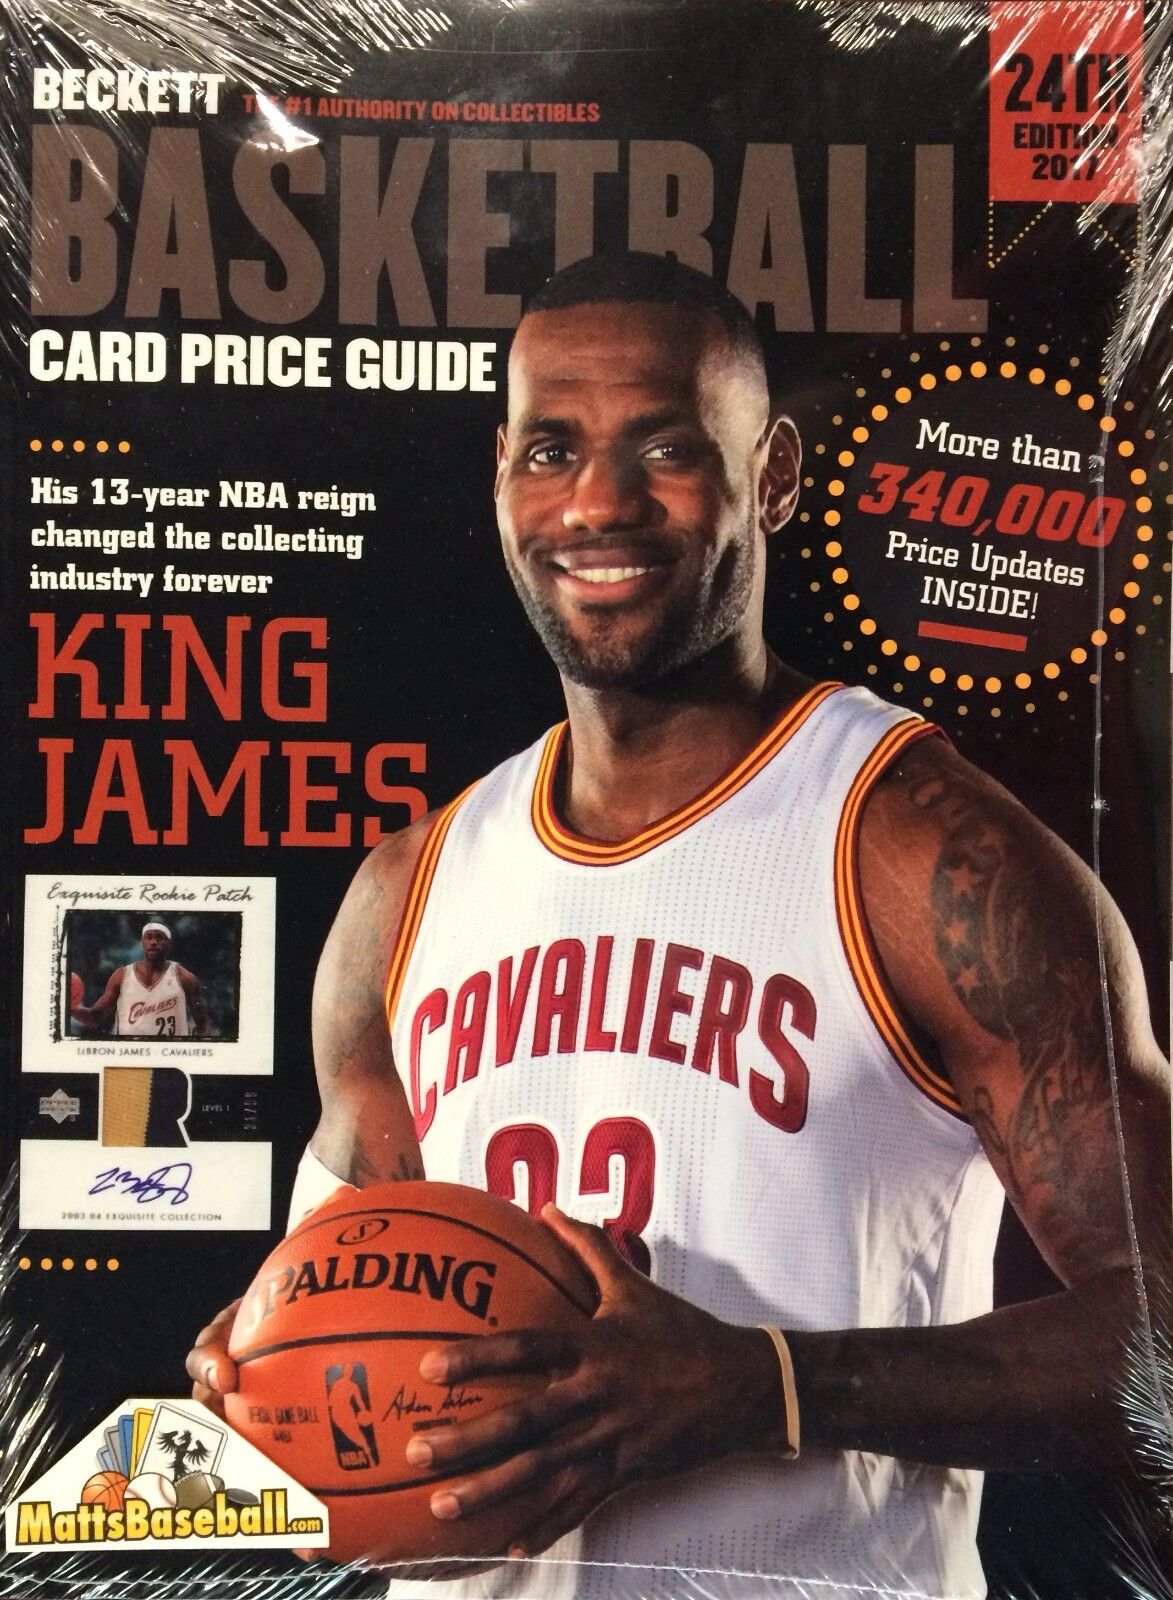 New! 2016 Beckett Basketball Annual Price Guide #24 LeBron James $29.95 cover Без бренда